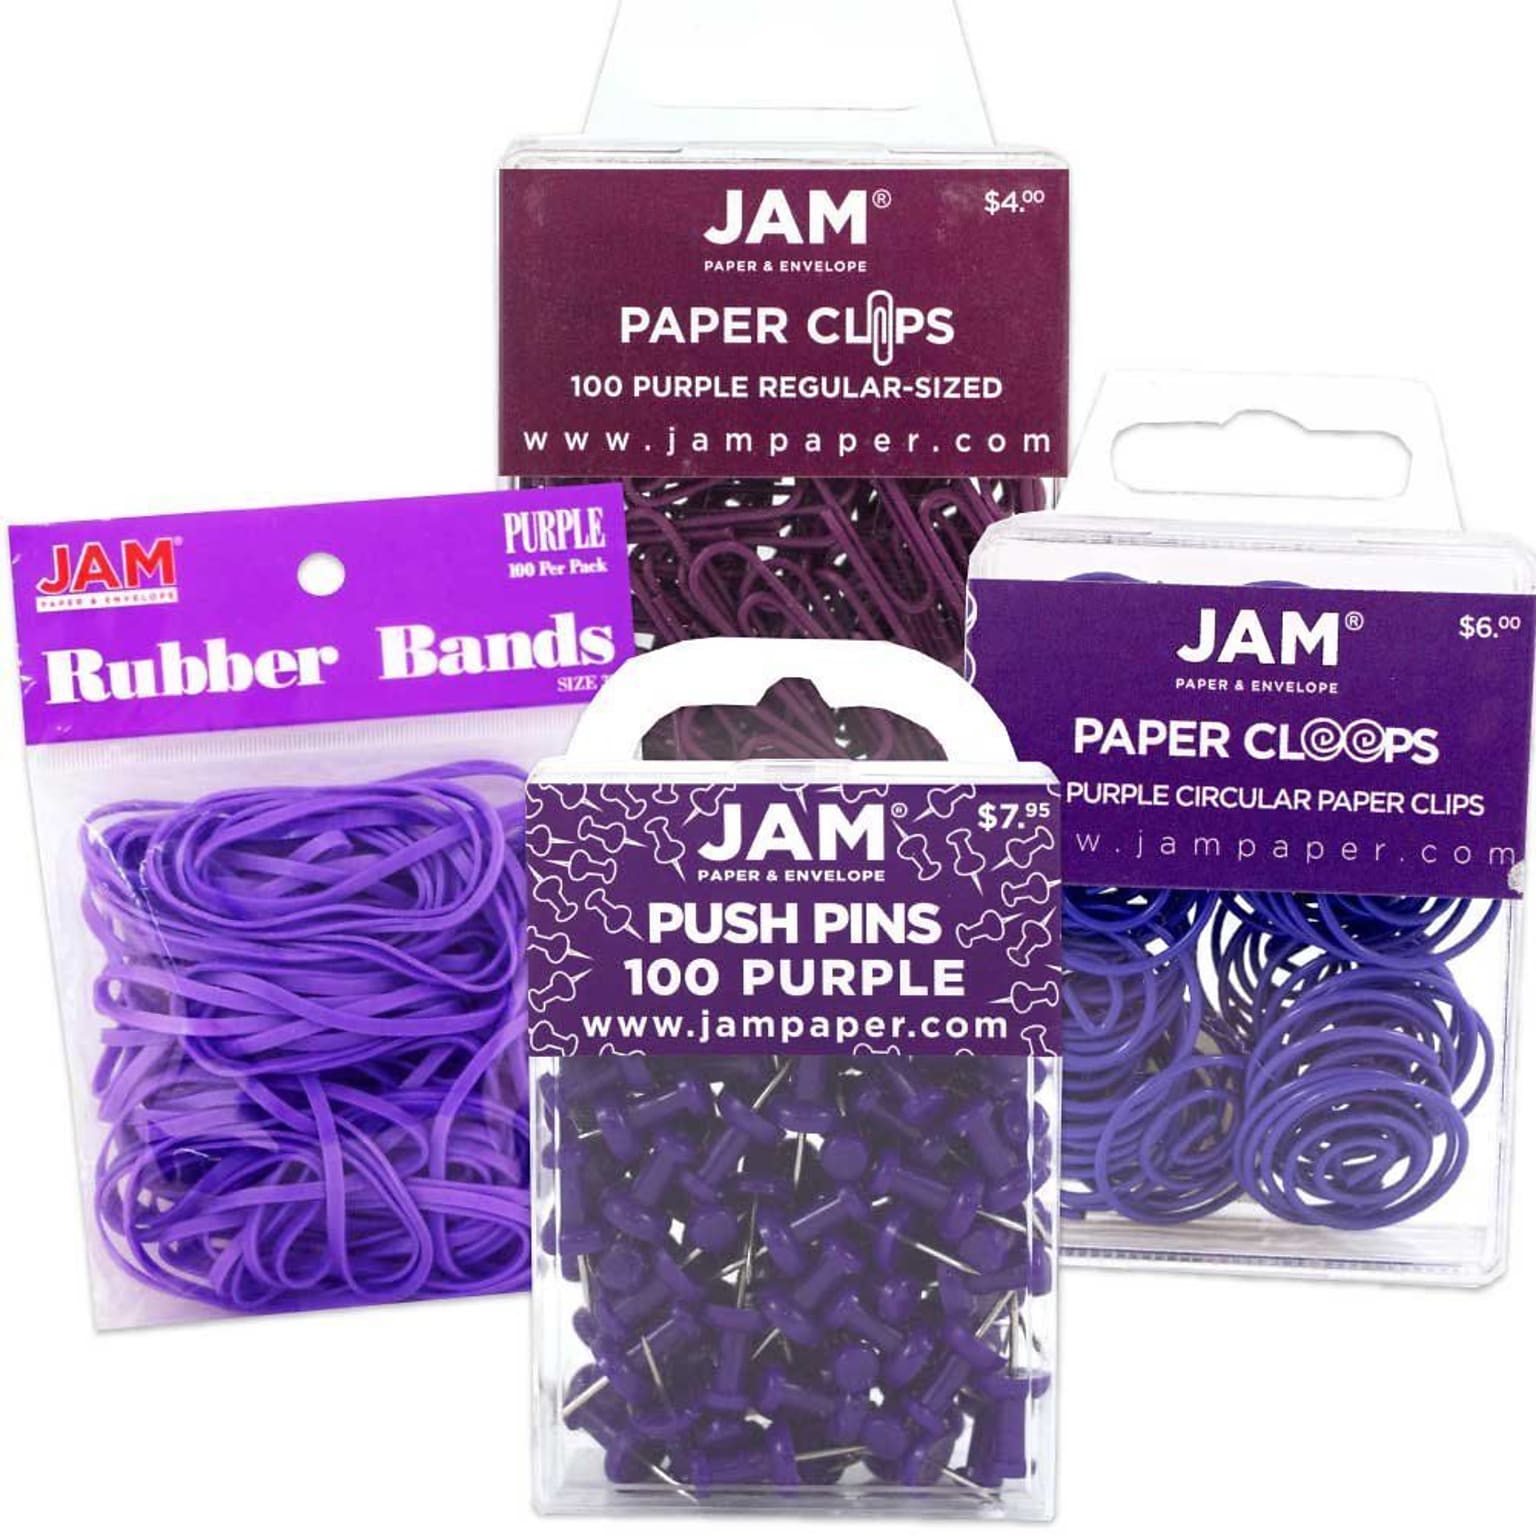 JAM Paper® Office Supply Assortment, Purple, 1 Rubber Bands, 1 Push Pins, 1 Paper Clips & 1 Round Paper Cloops (3224PUOASRT)